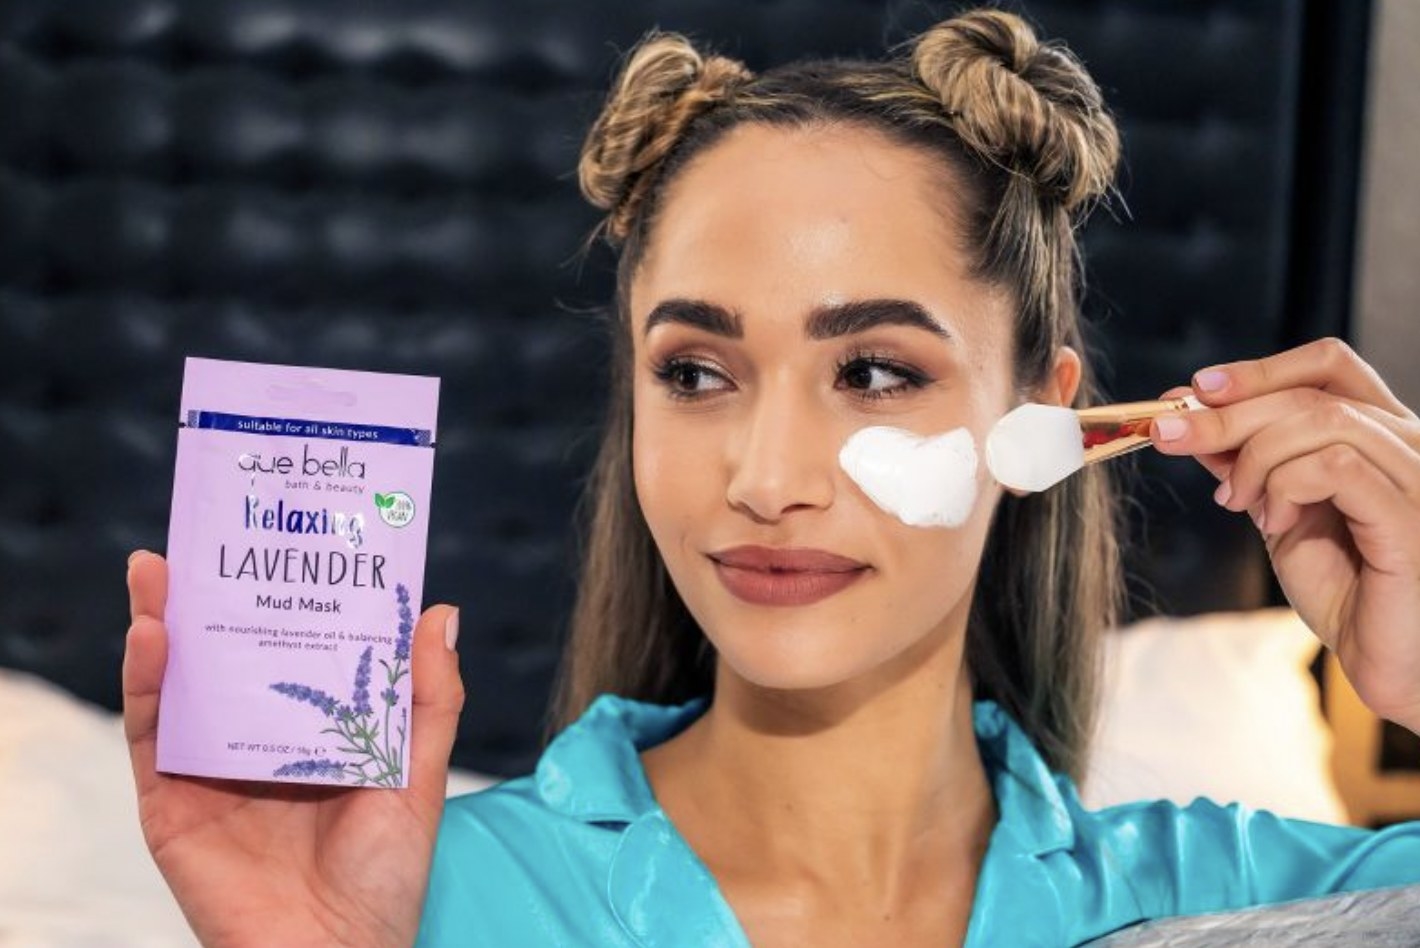 Model applying the mud mask to face and holding up small lavender mud mask package